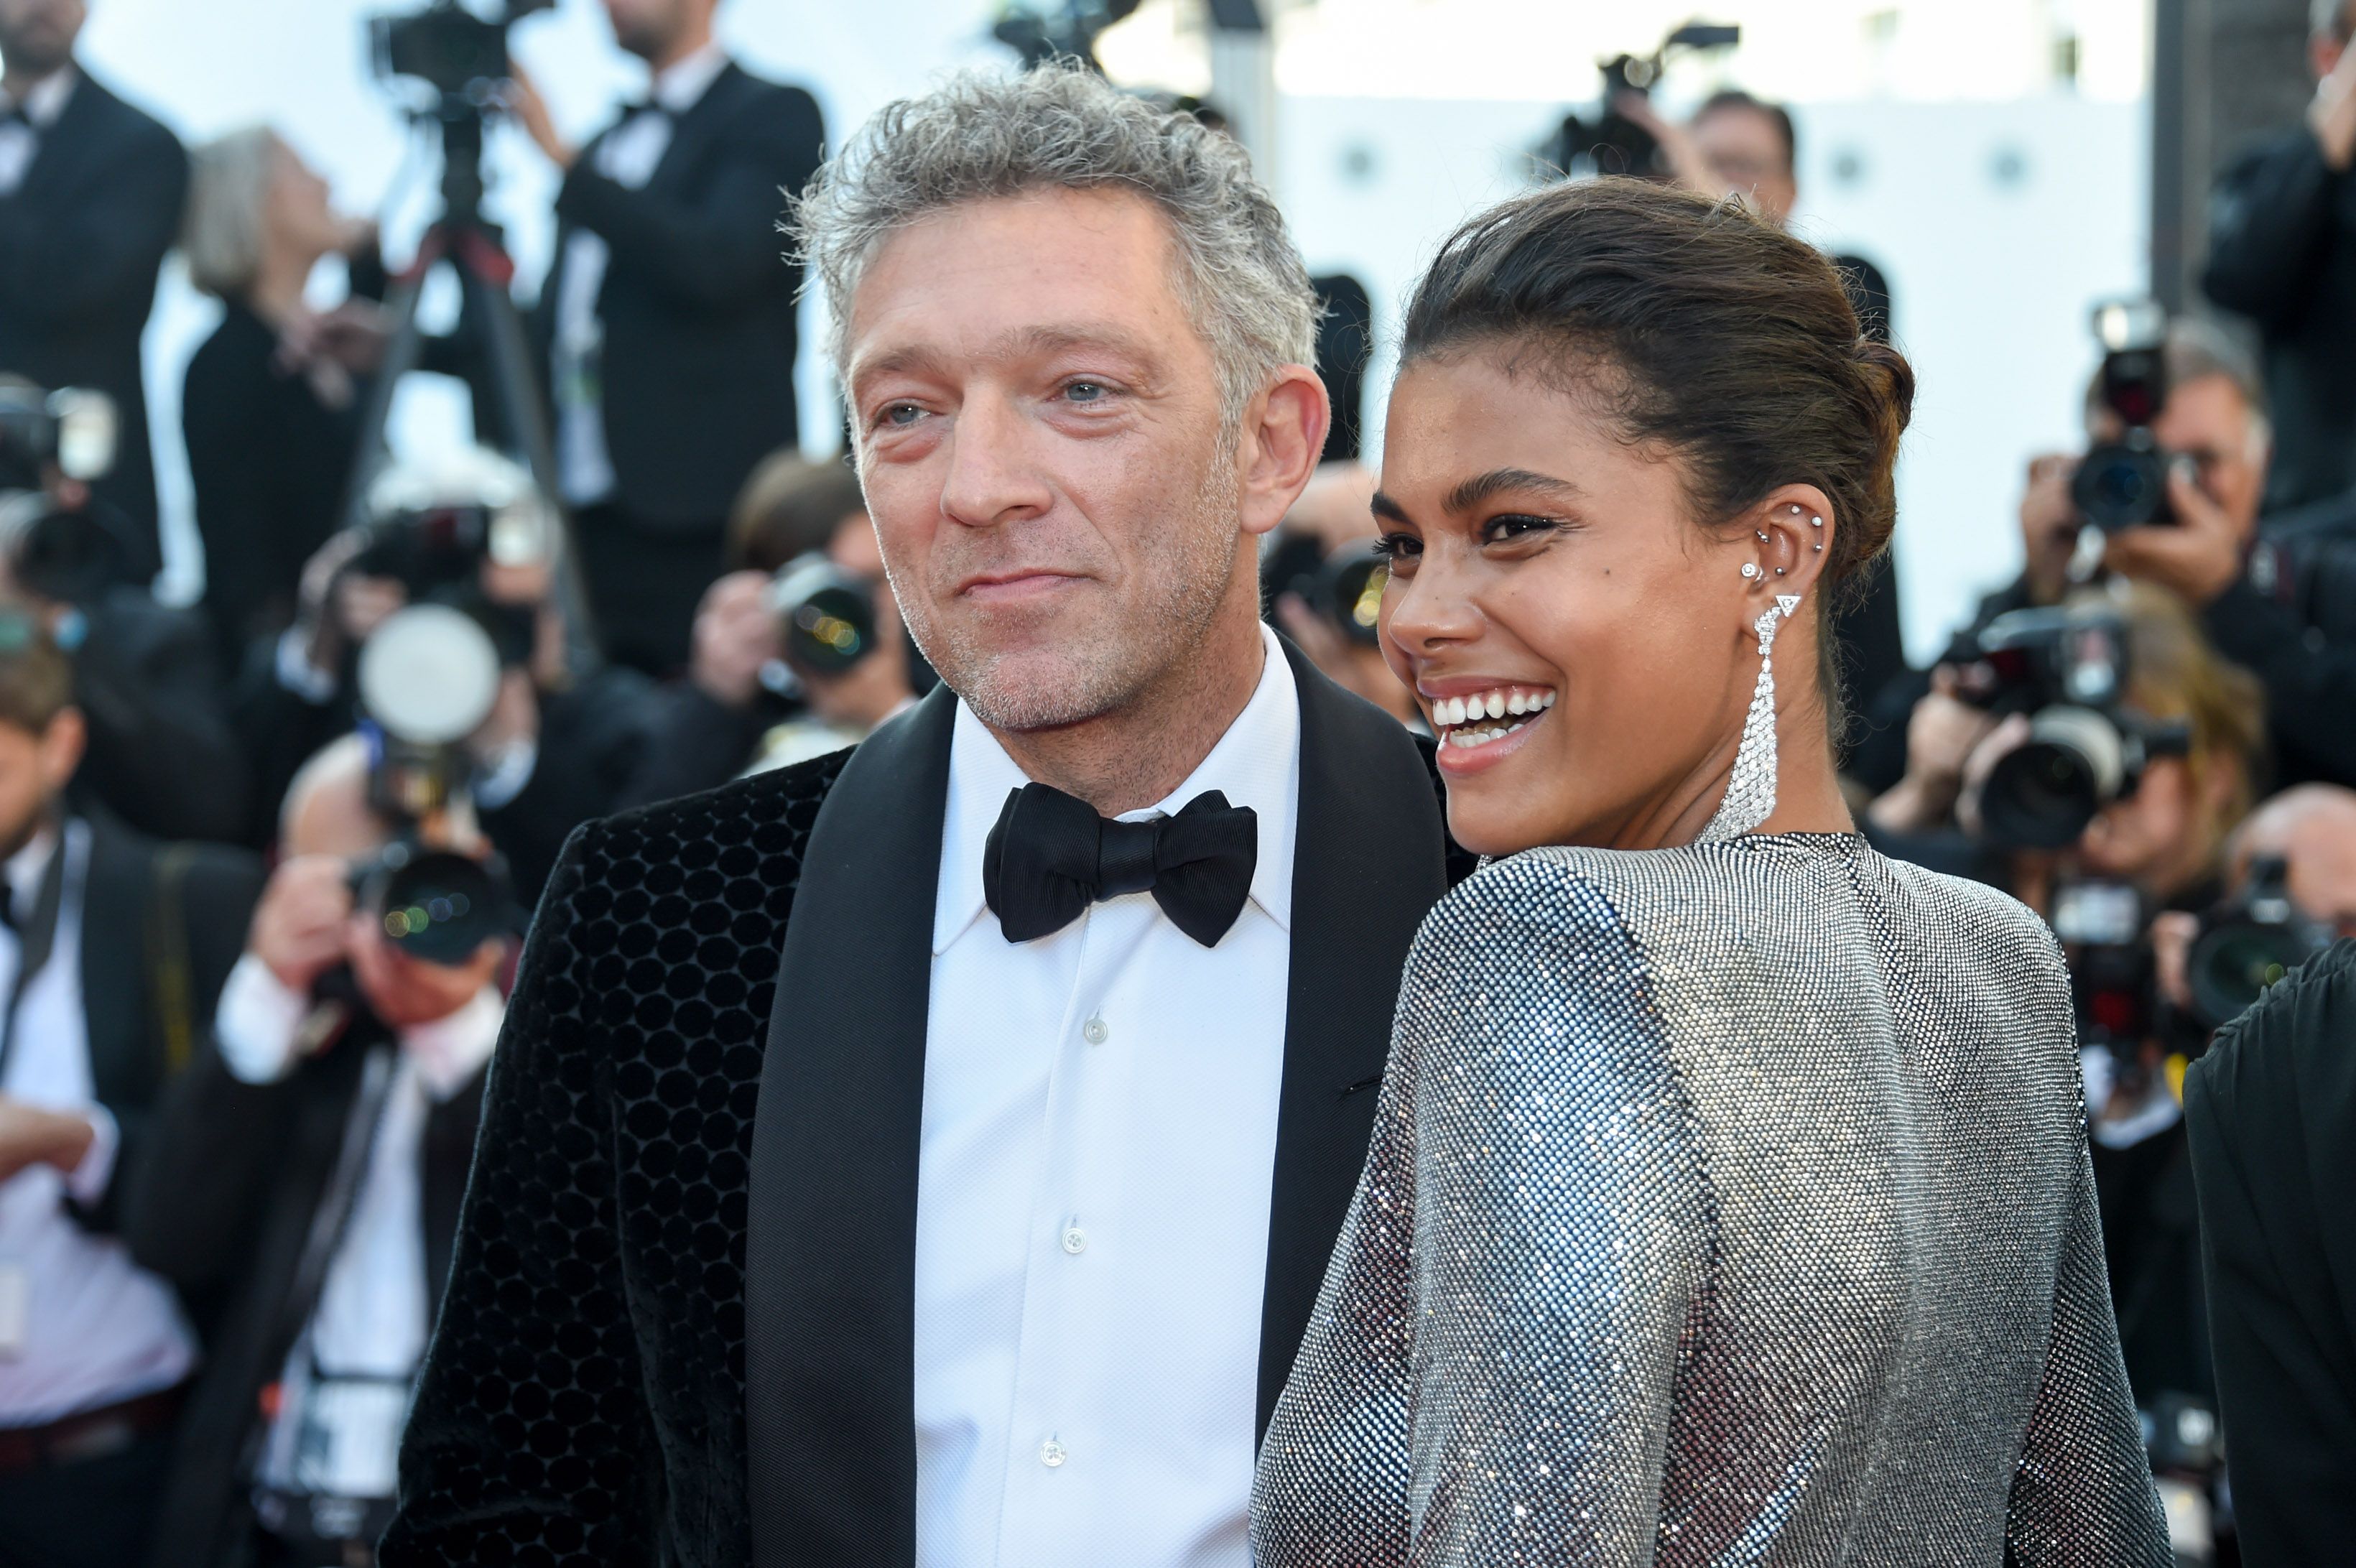 Vincent Cassel and Tina Kunakey at the screening of "Girls of The Sun" (Les Filles Du Soleil) during the 71st annual Cannes Film Festival at Palais des Festivals on May 12, 2018 | Photo: Getty Images